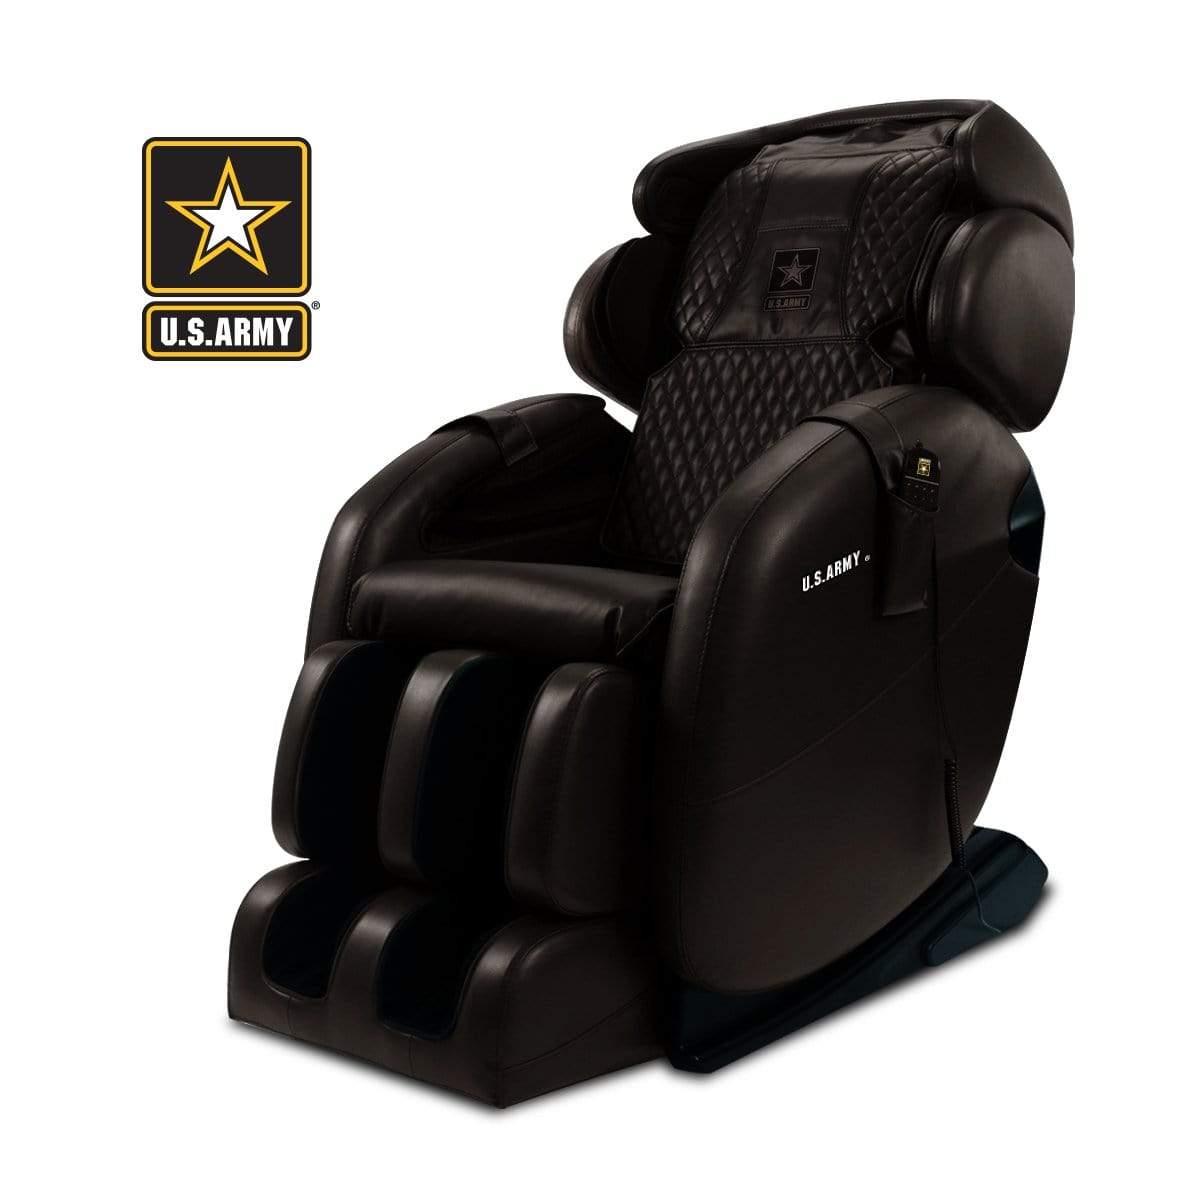 Ace Massage Chairs Chocolate Brown KAHUNA CHAIR - LM 6800S[ARMY EDITION] LM 6800S[ARMY EDITION]